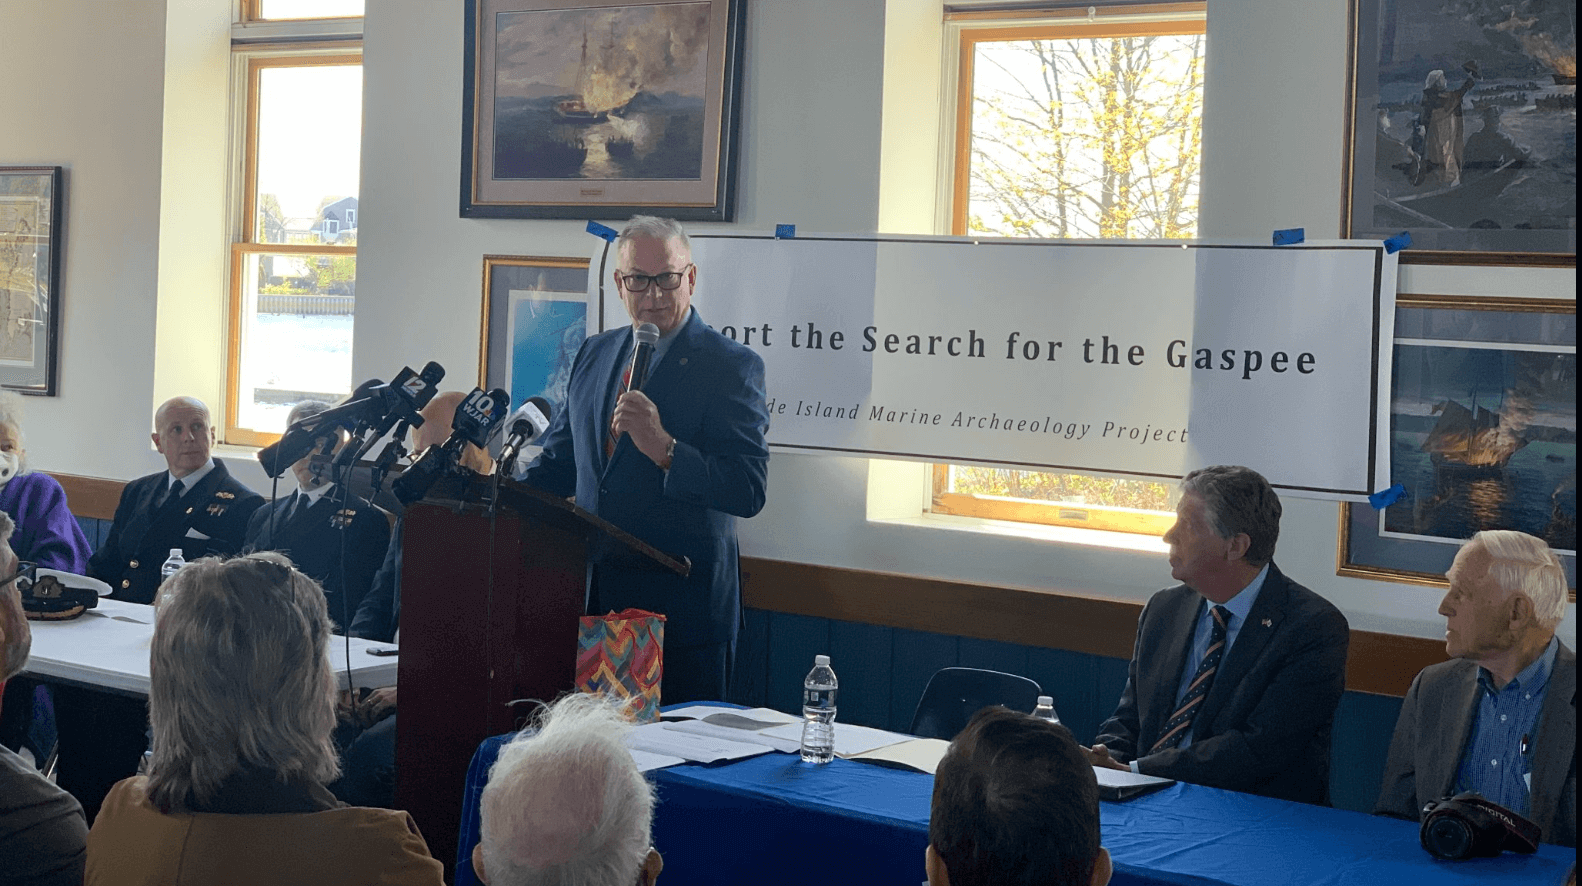 [CREDIT: Office of Rep. McNamara] State Rep. Joseph M. McNamara (D-Dist. 19) speaks during an announcement of a renewed Gaspee search at the Aspray Boat House.